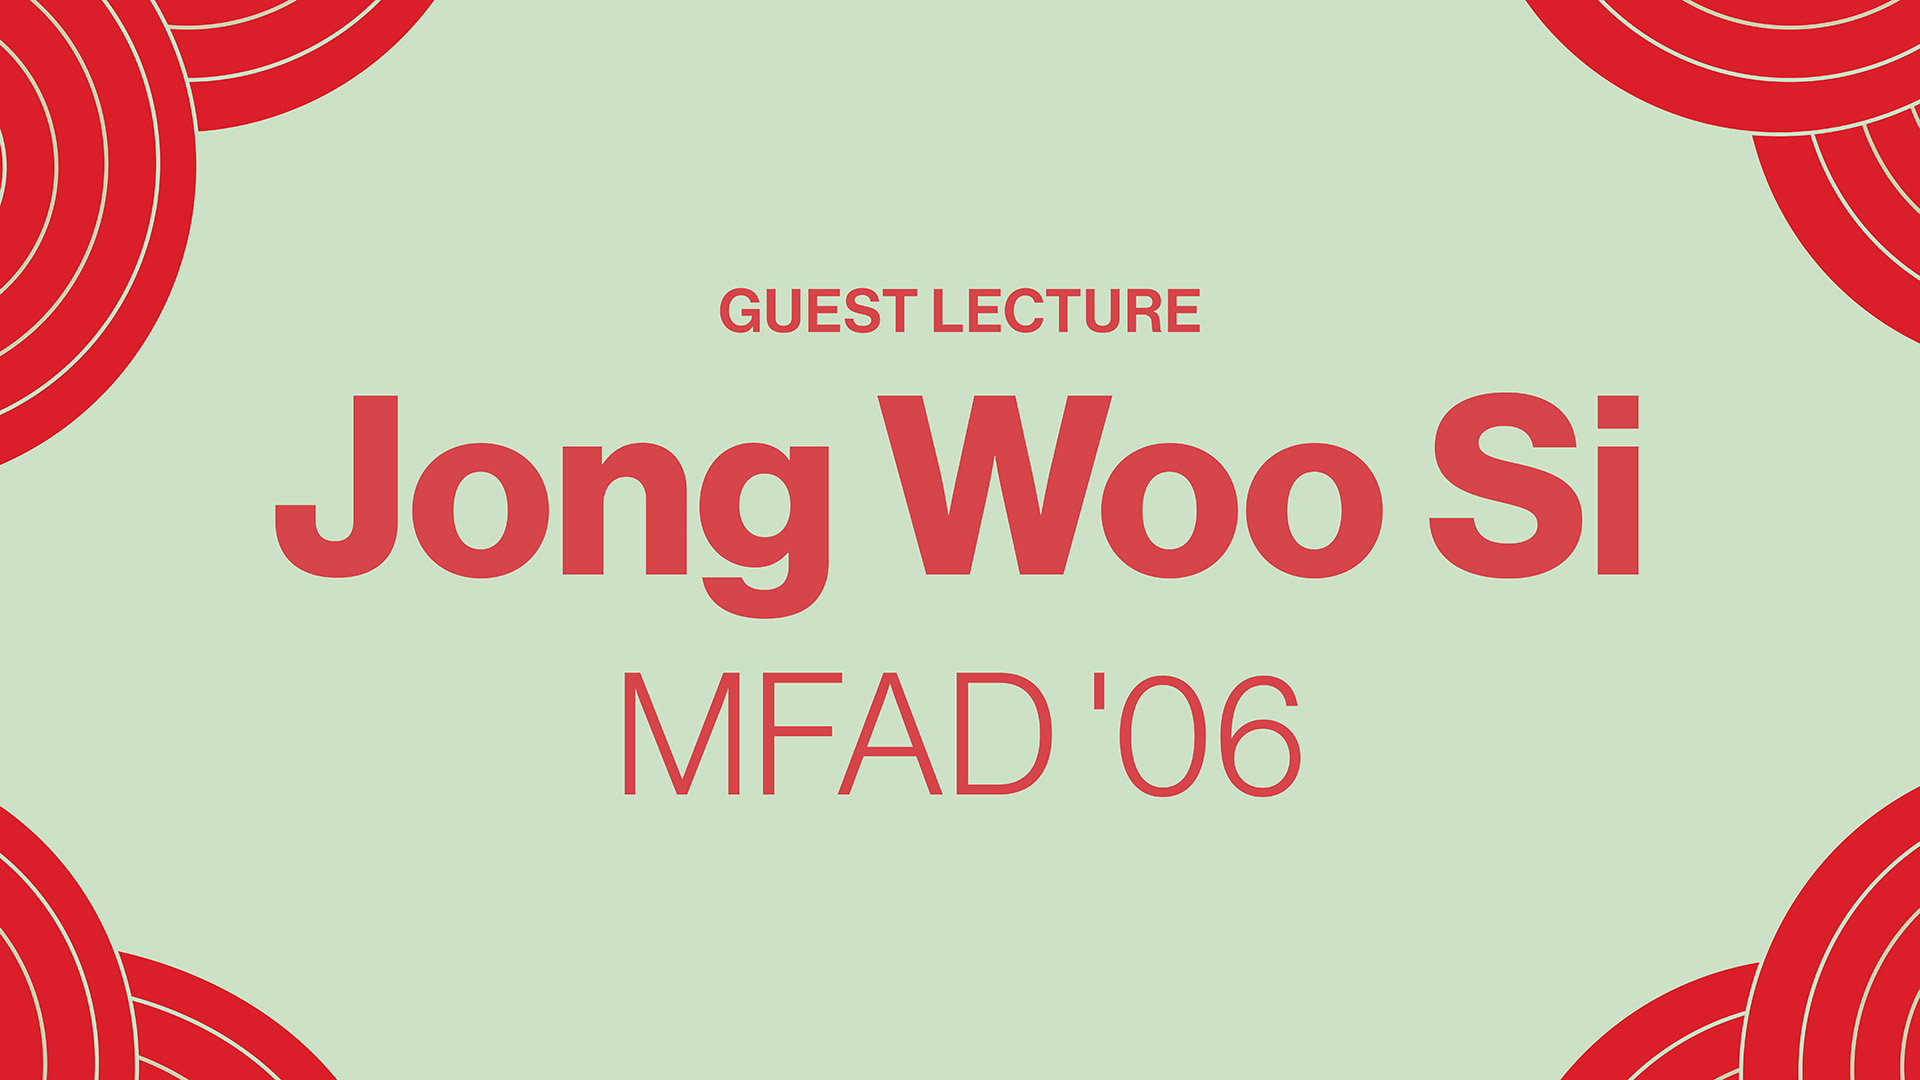 Jong Woo Si guest lecture announcement